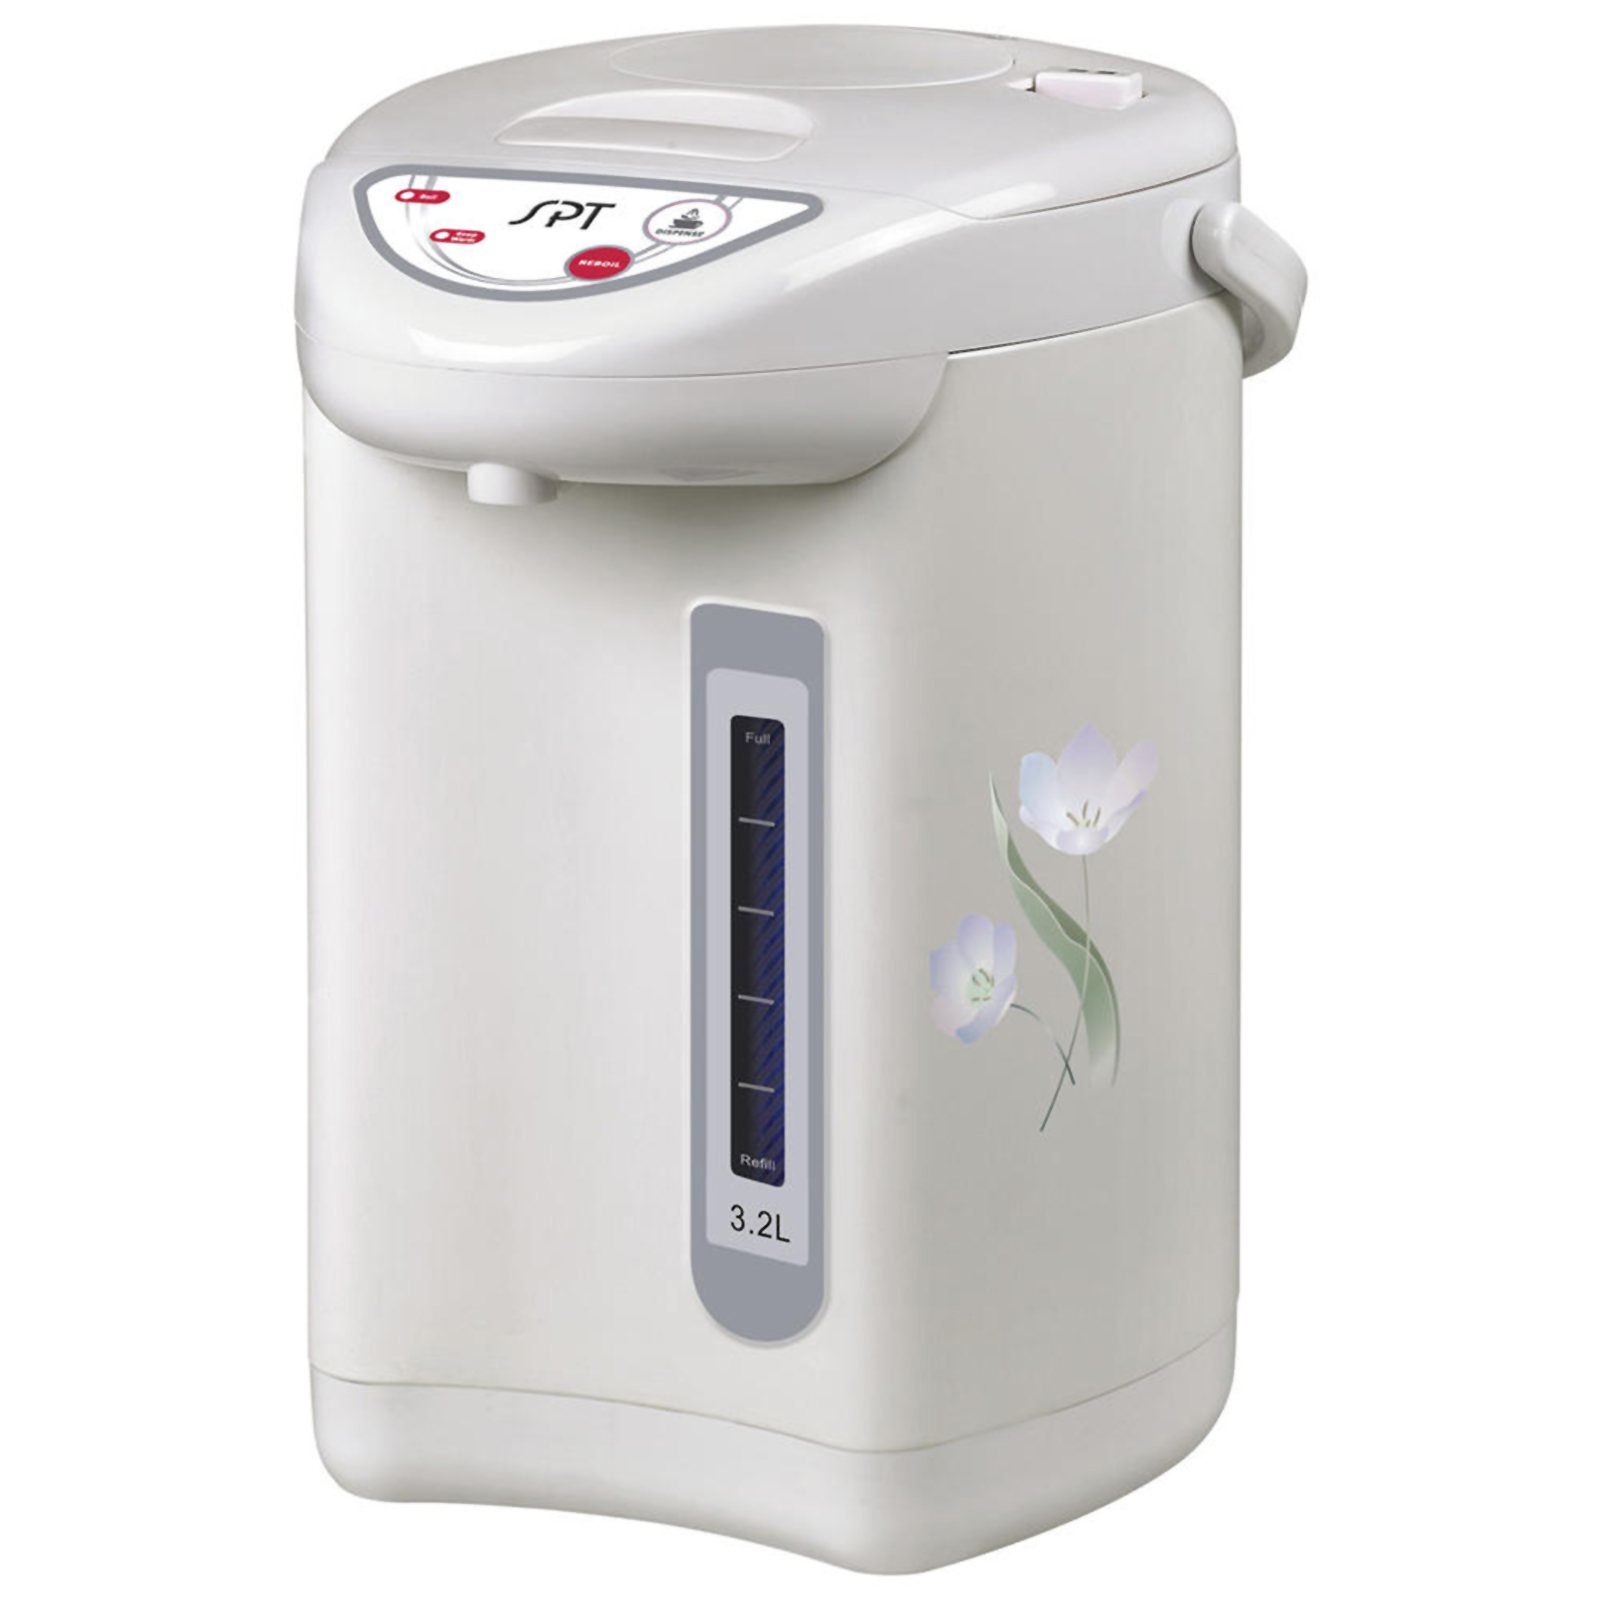 Sunpentown SP3201 SP-3201 3.2L Floral Hot Water Dispenser with 1-Touch Auto Dispense – White